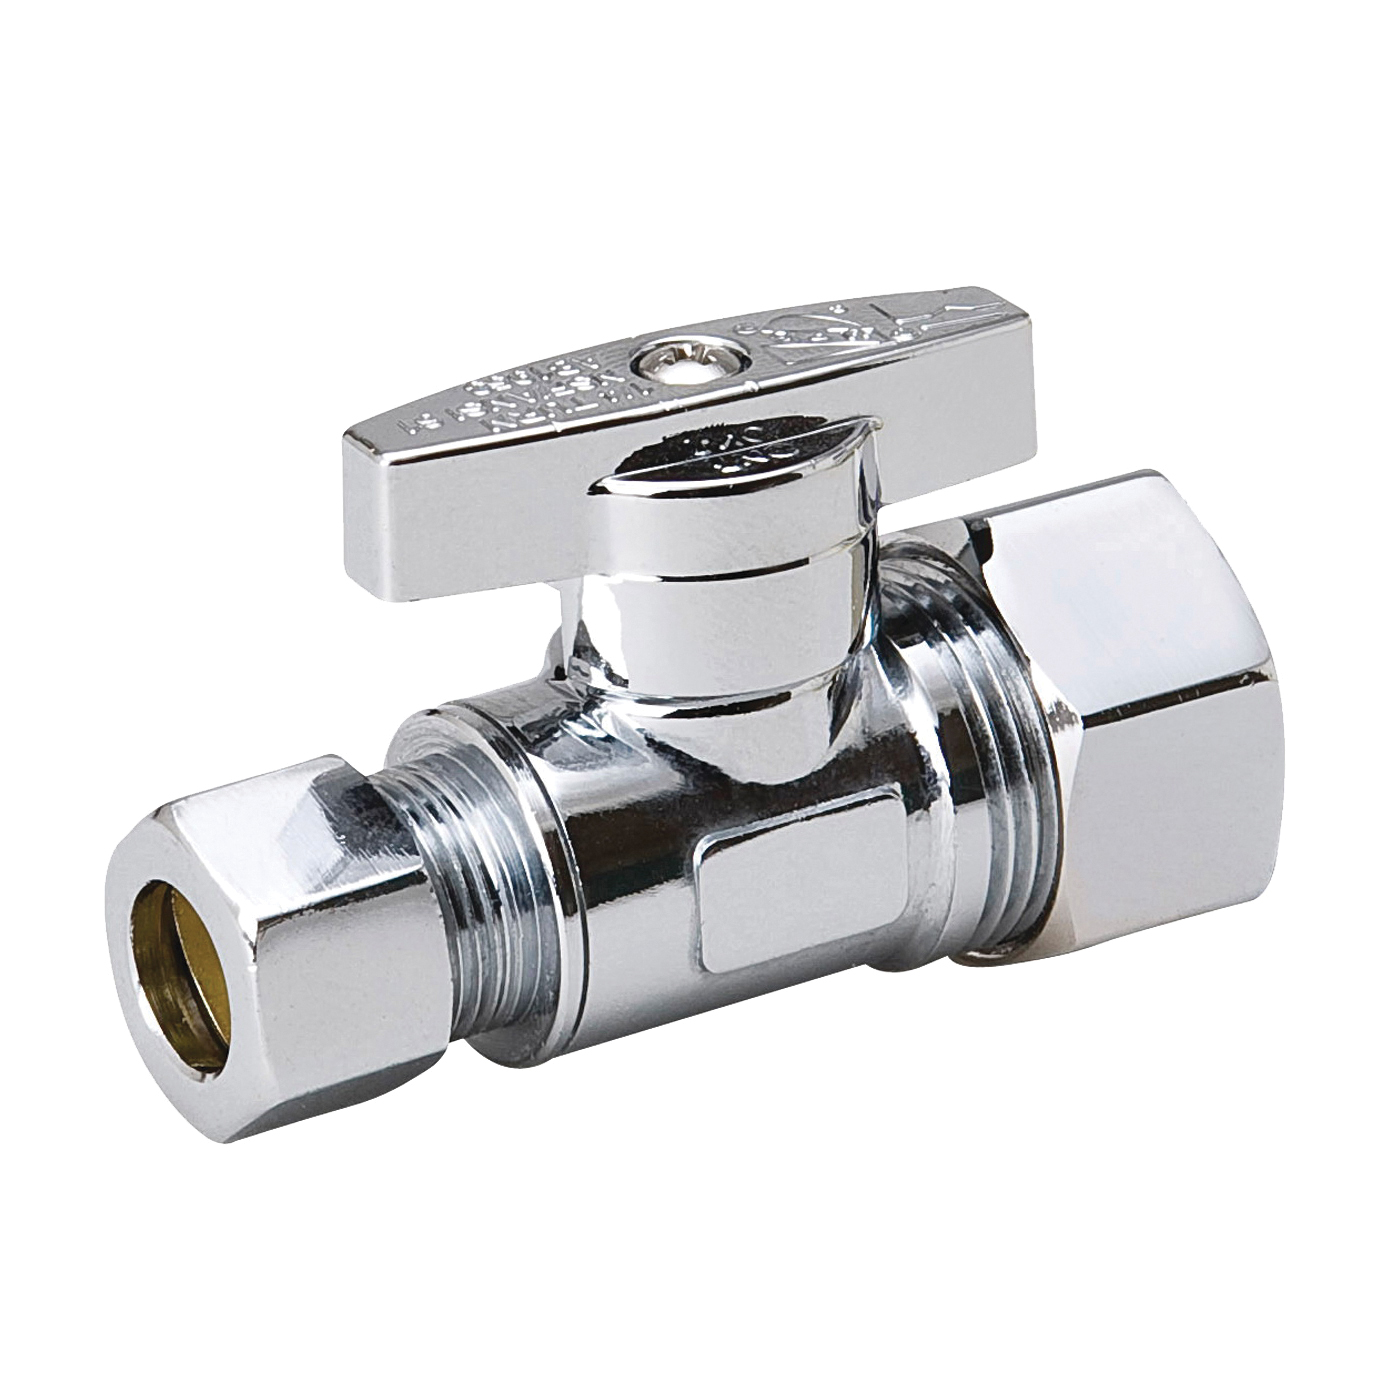 191-032HC Supply Line Stop Valve, 5/8 x 3/8 in Connection, Compression, 125 psi Pressure, Brass Body